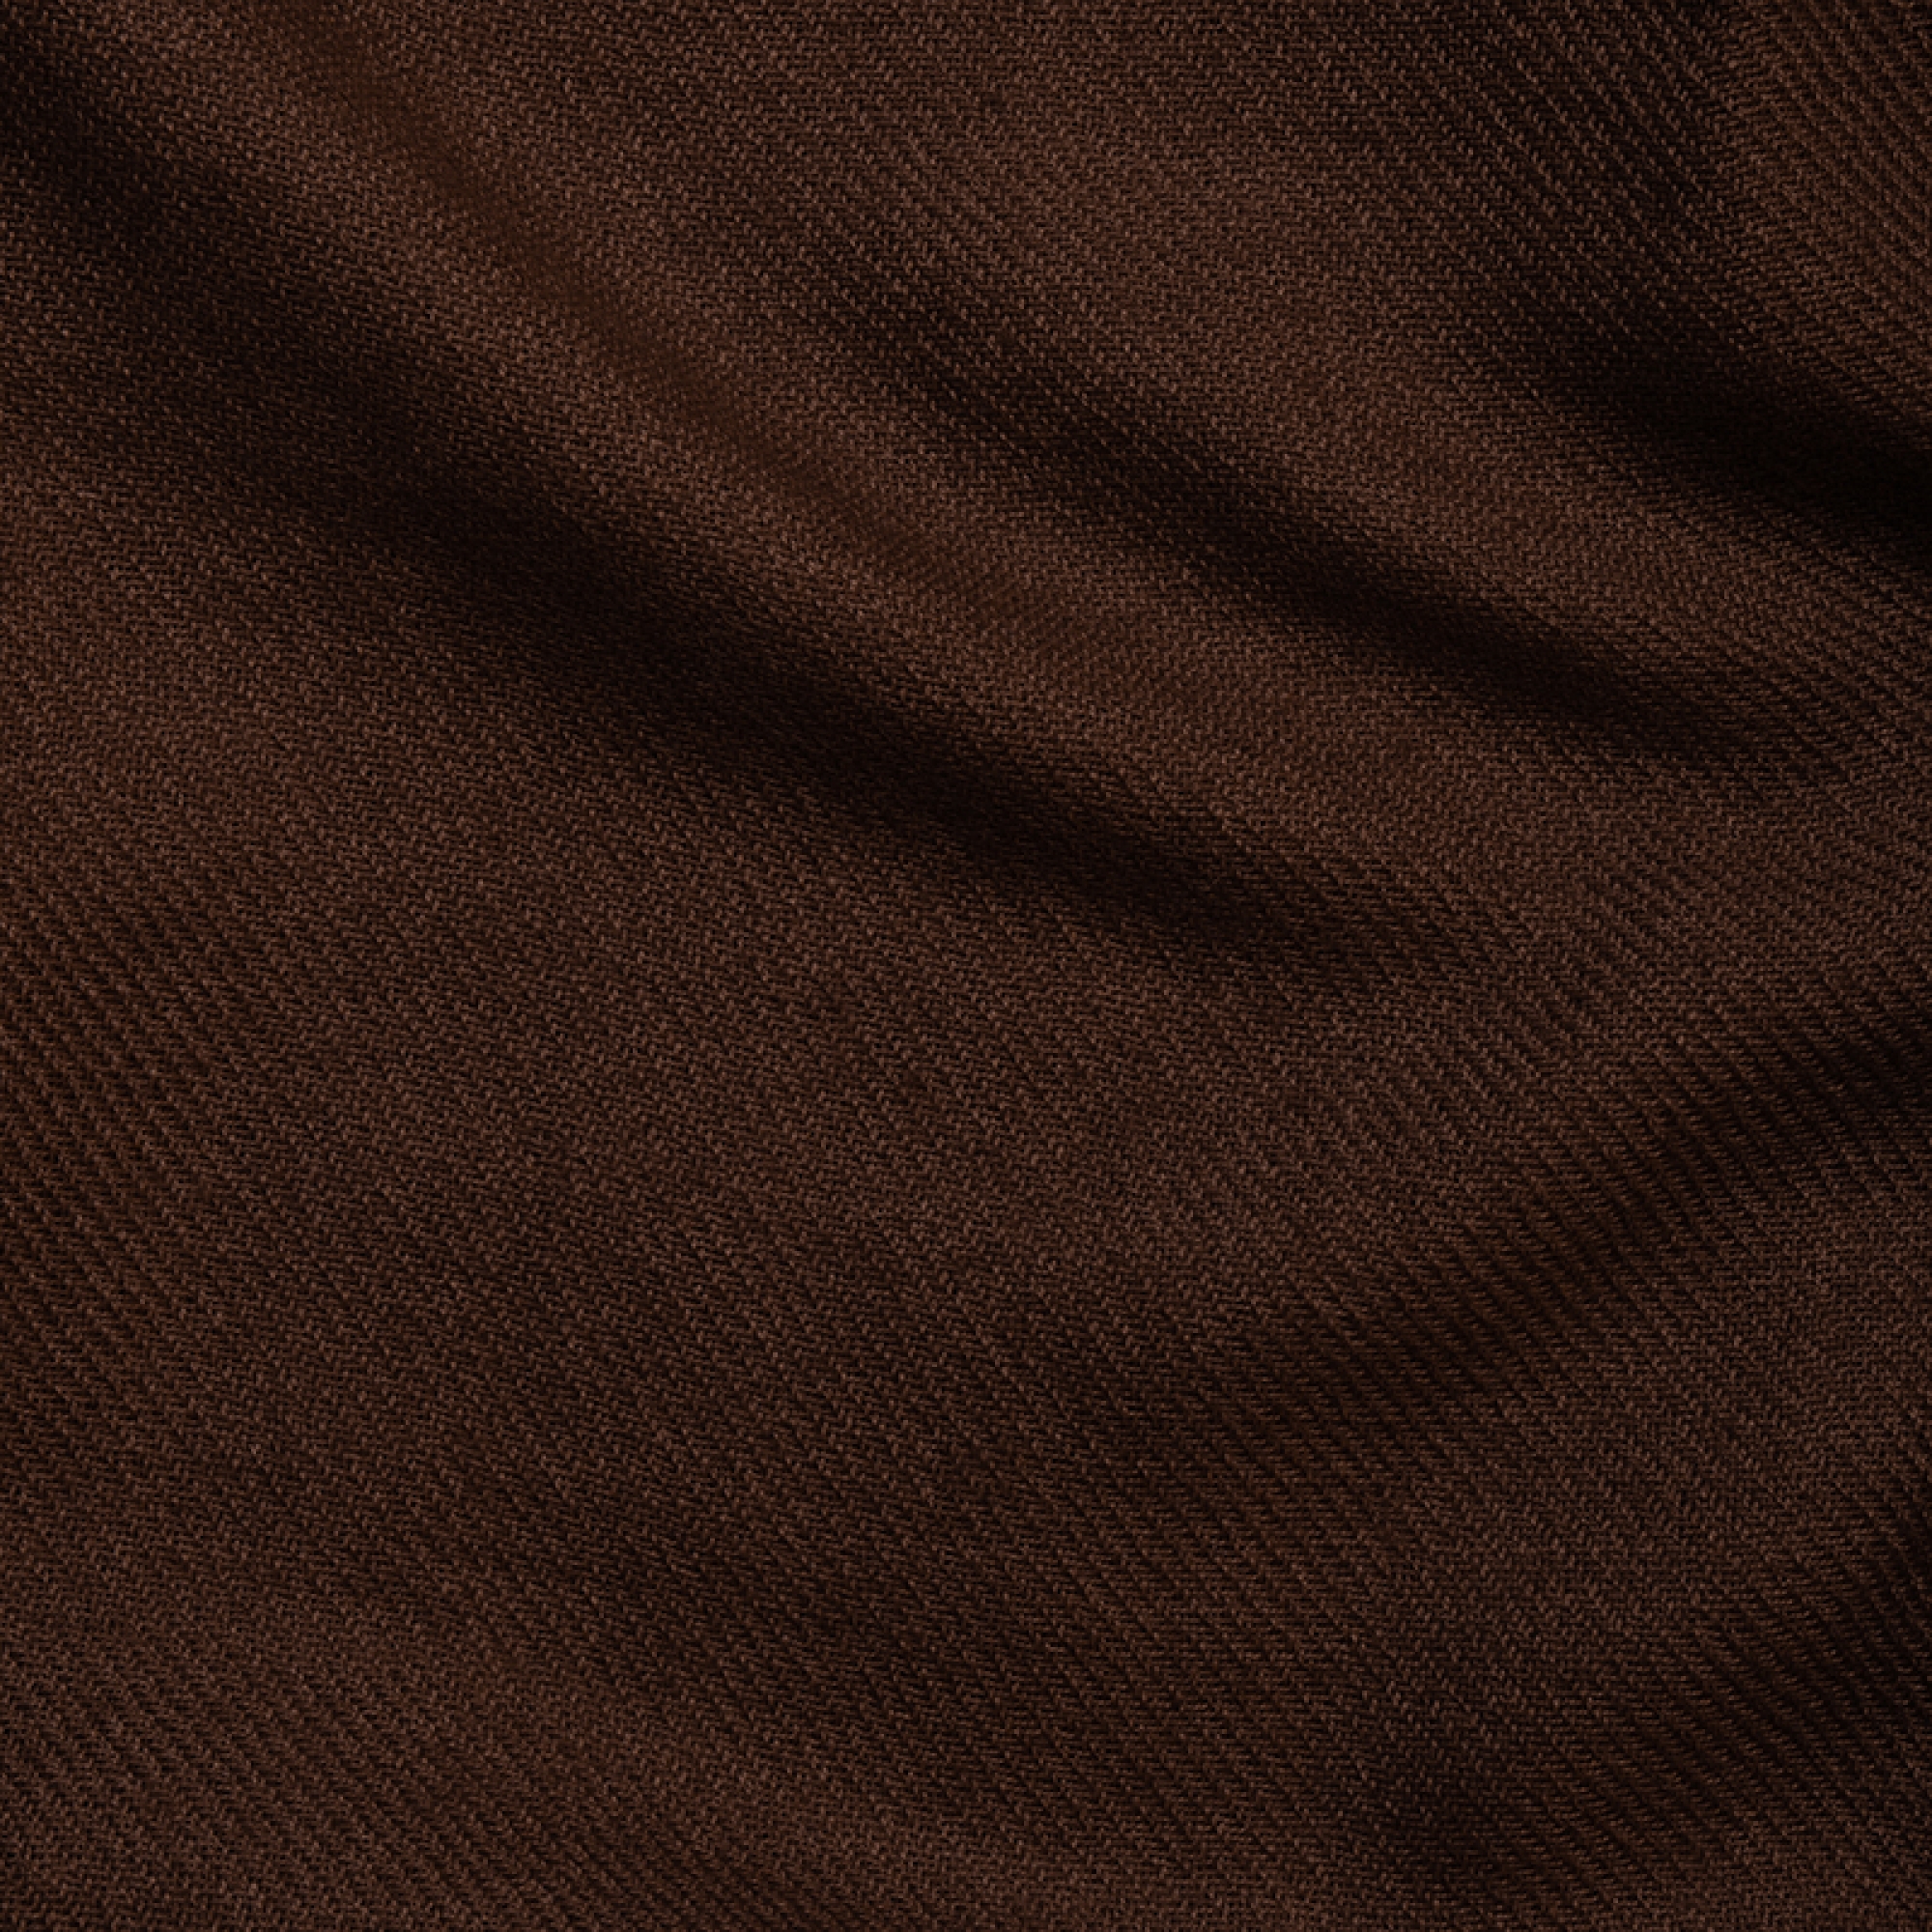 Cashmere accessories cocooning toodoo plain xl 240 x 260 cacao 240 x 260 cm